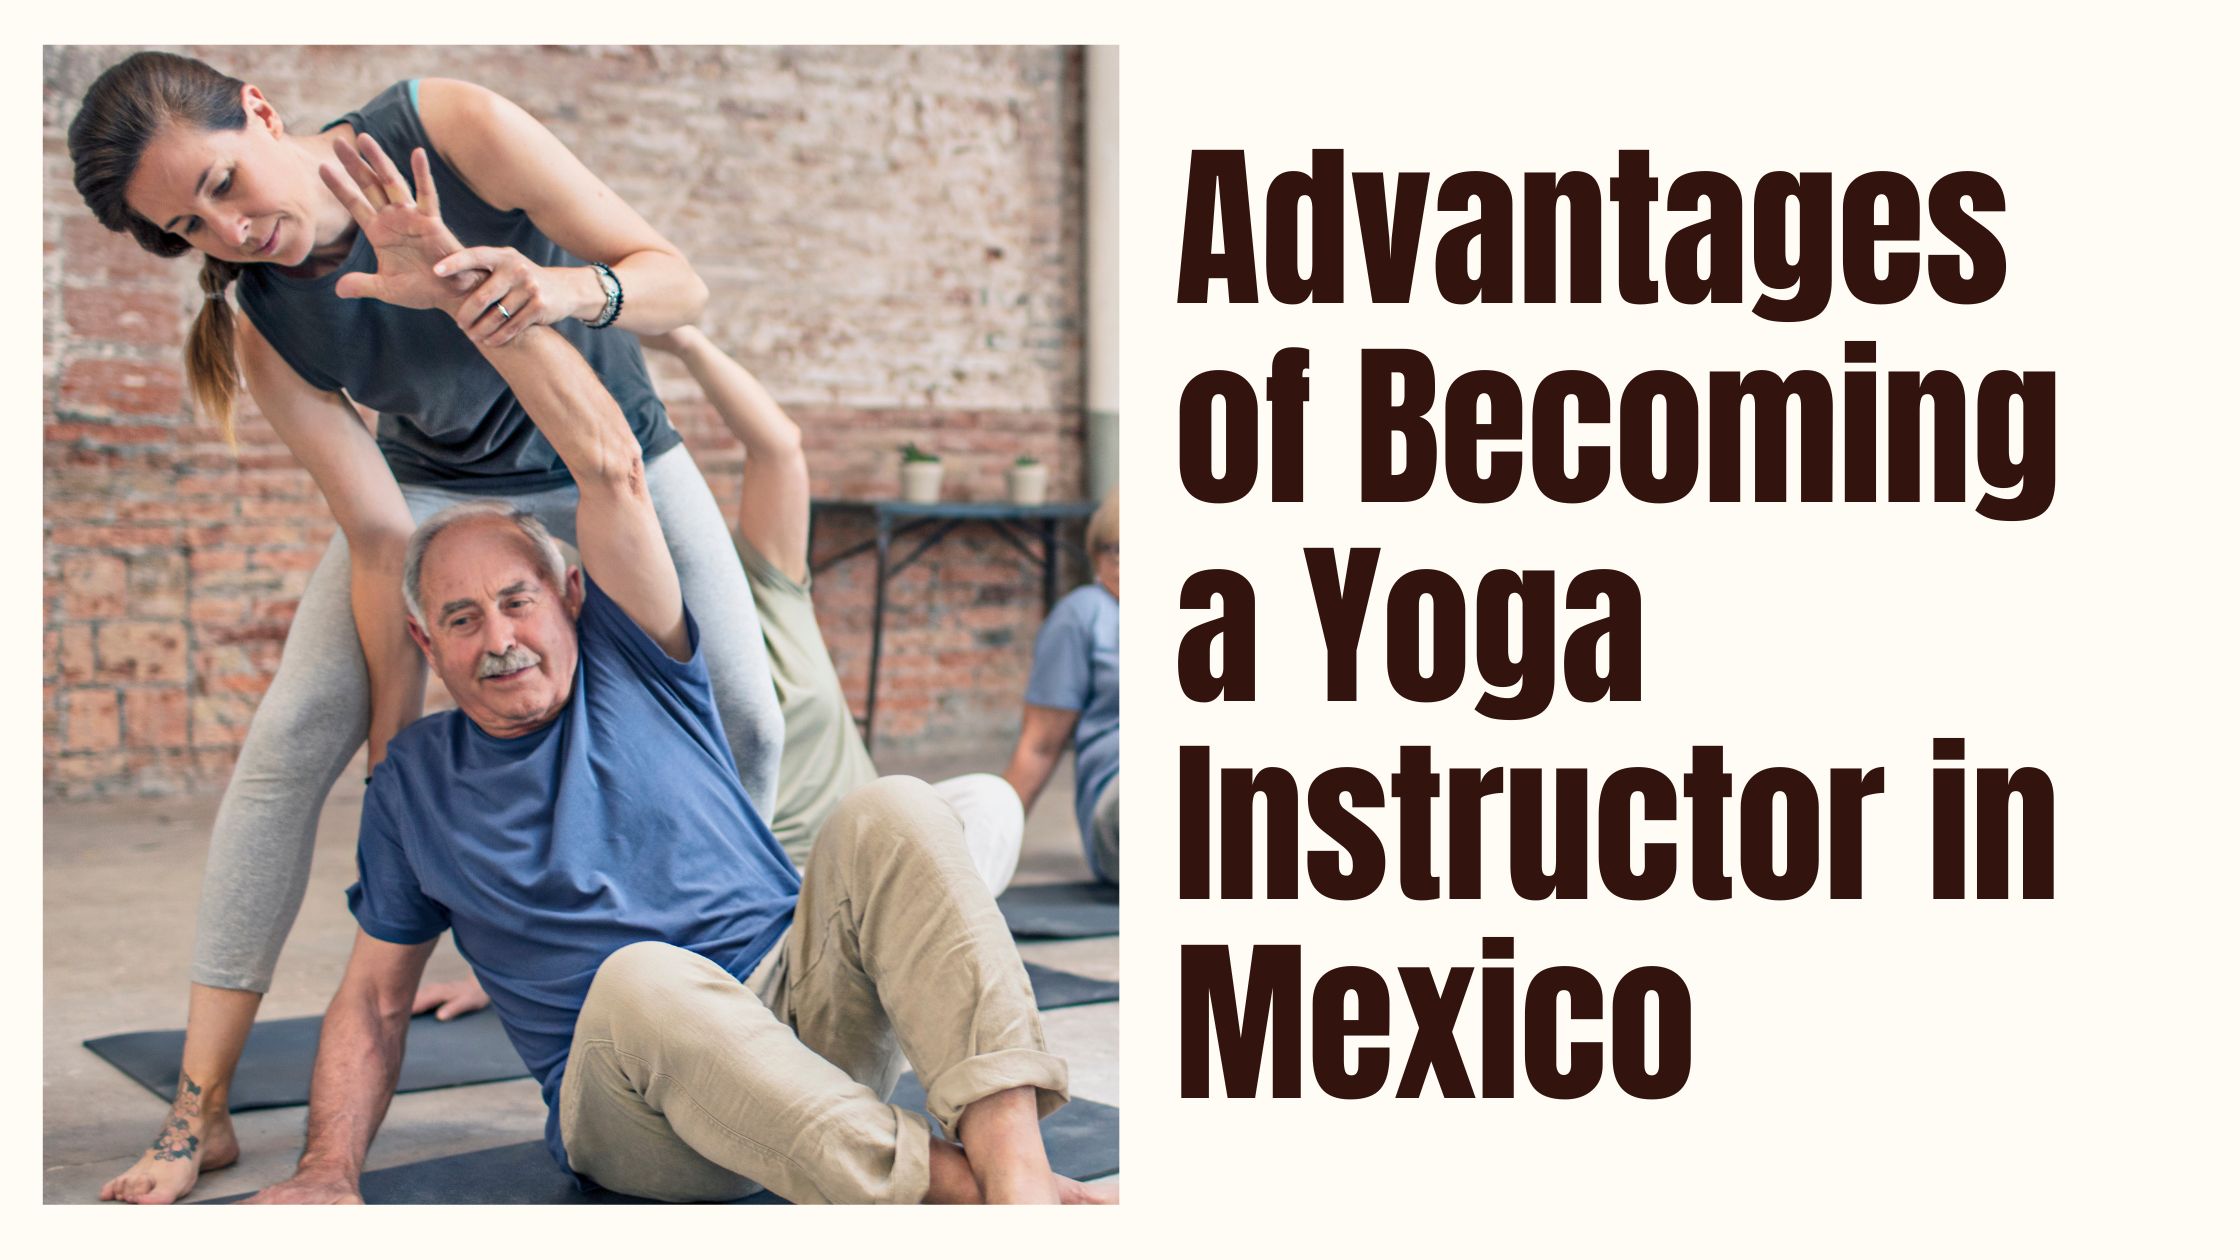 Advantages of Becoming a Yoga Instructor in Mexico